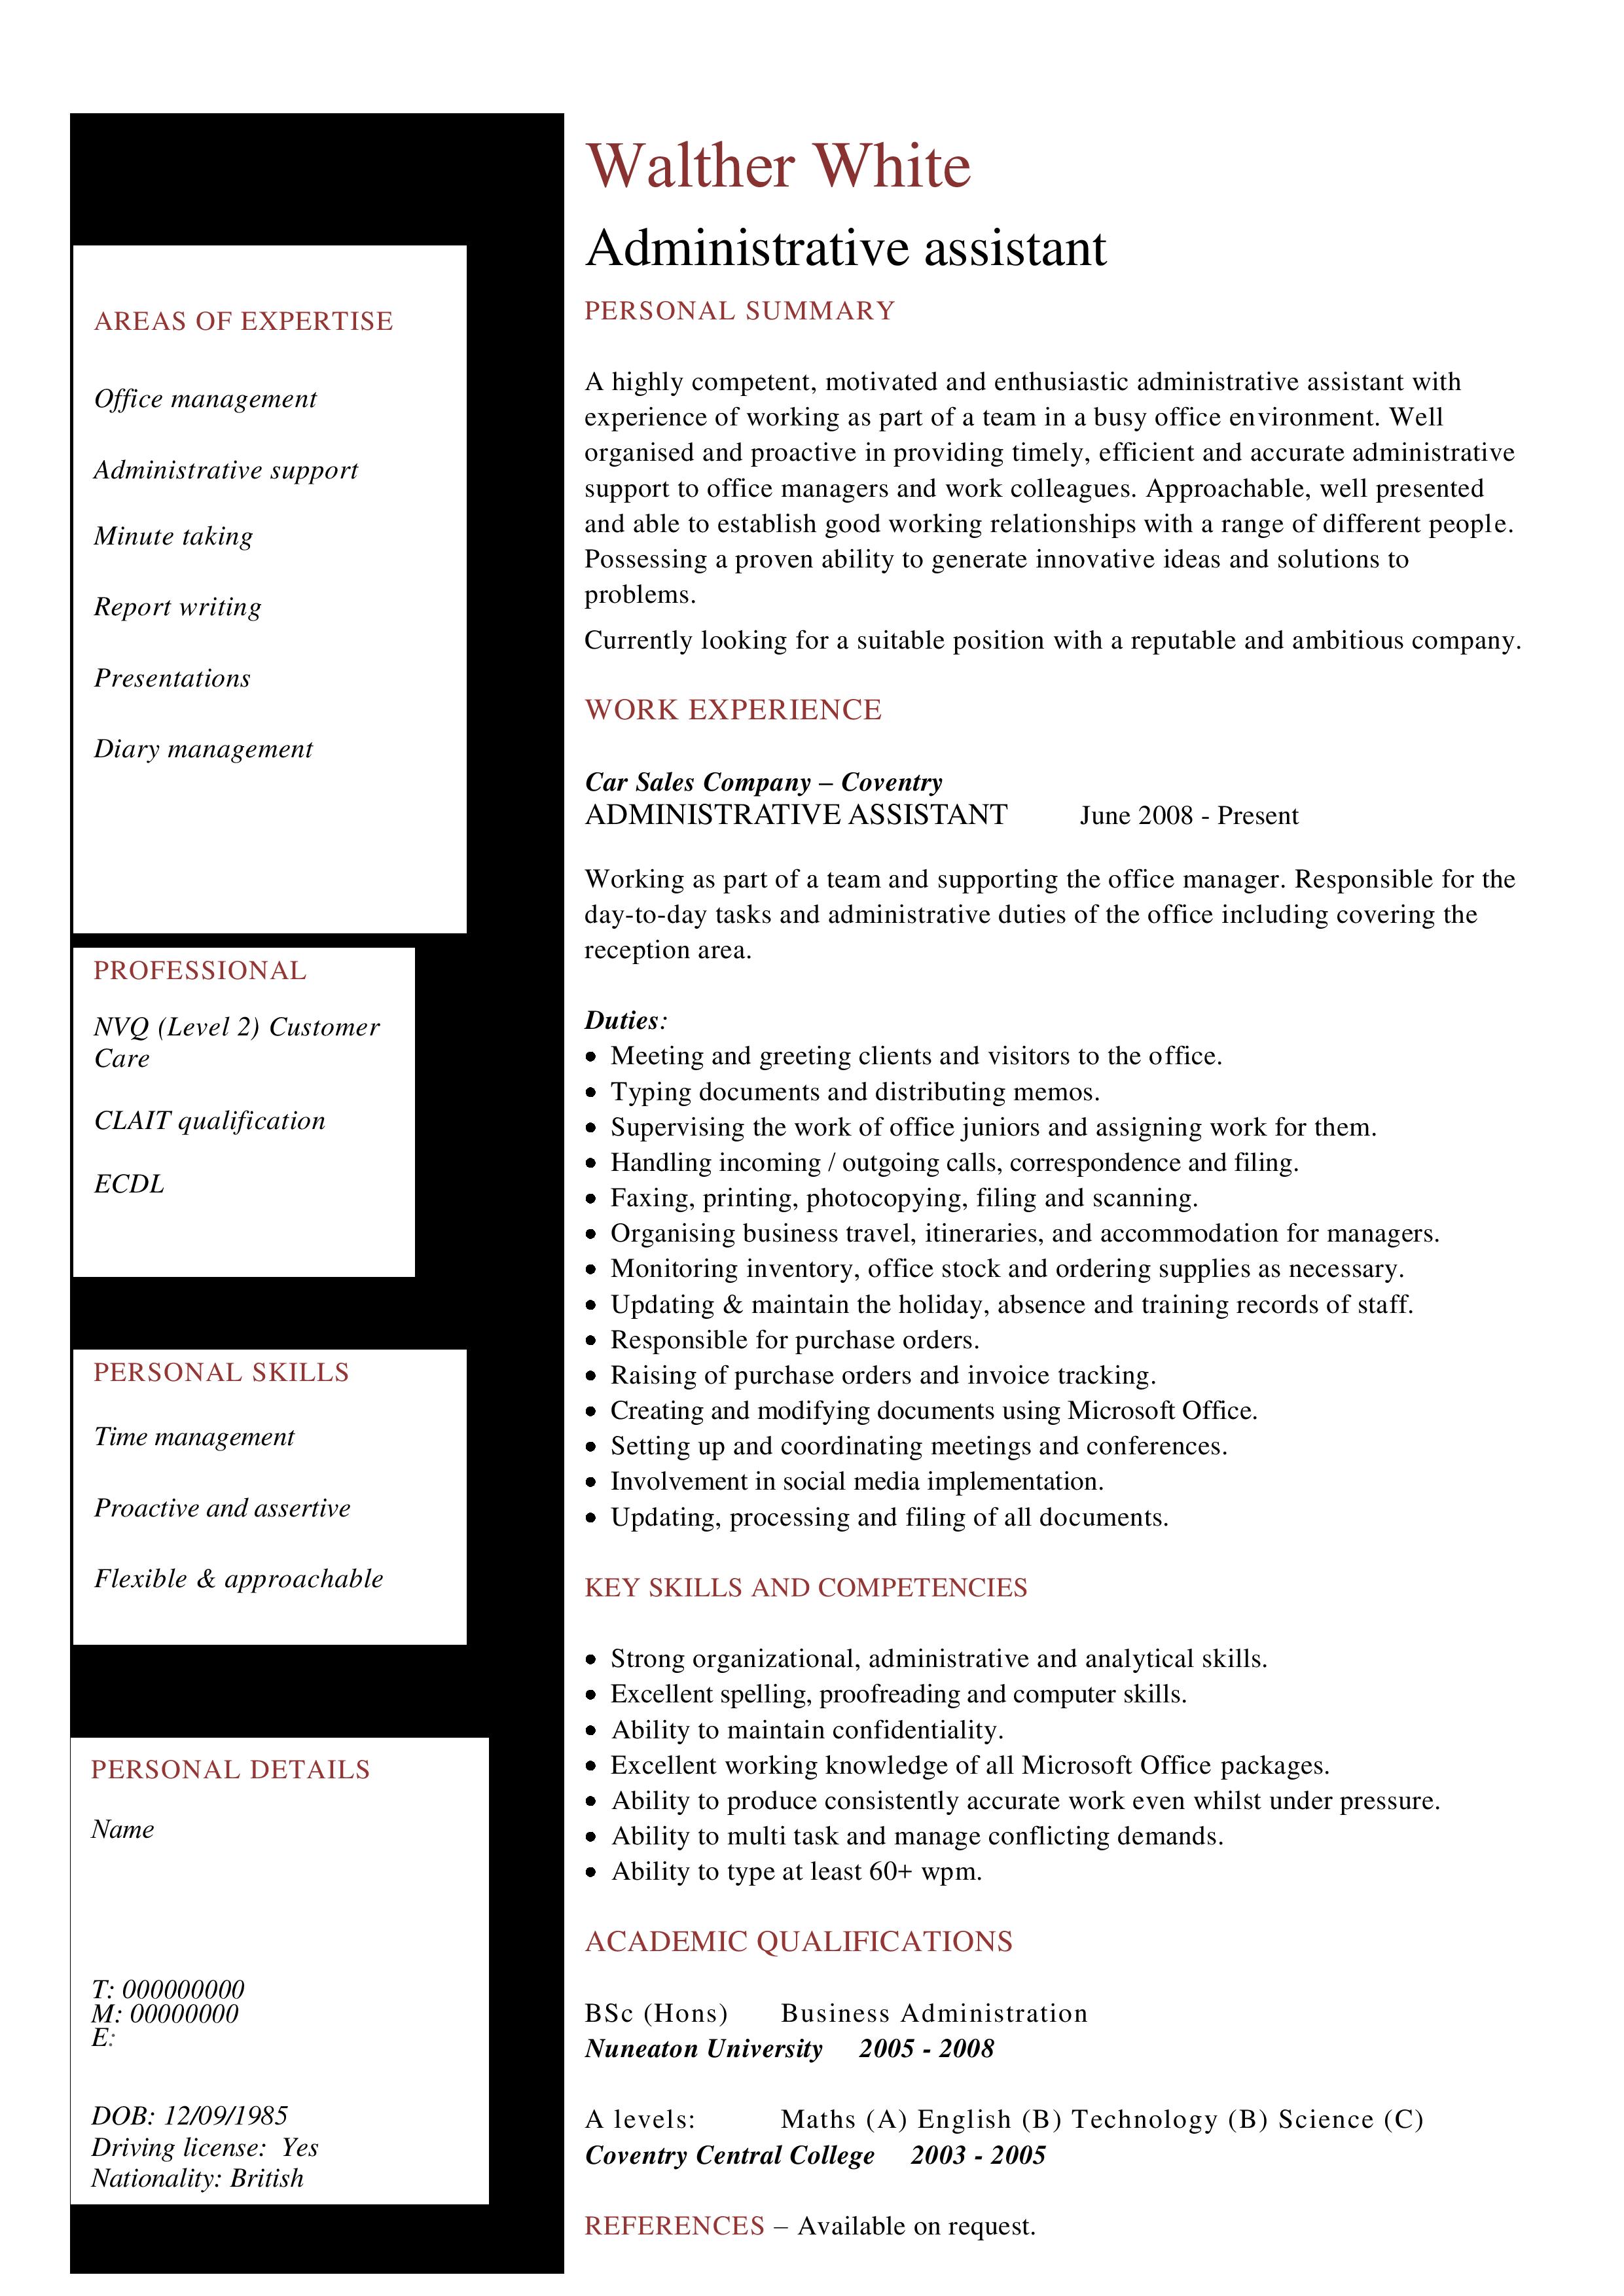 Administrative Work Experience Resume main image